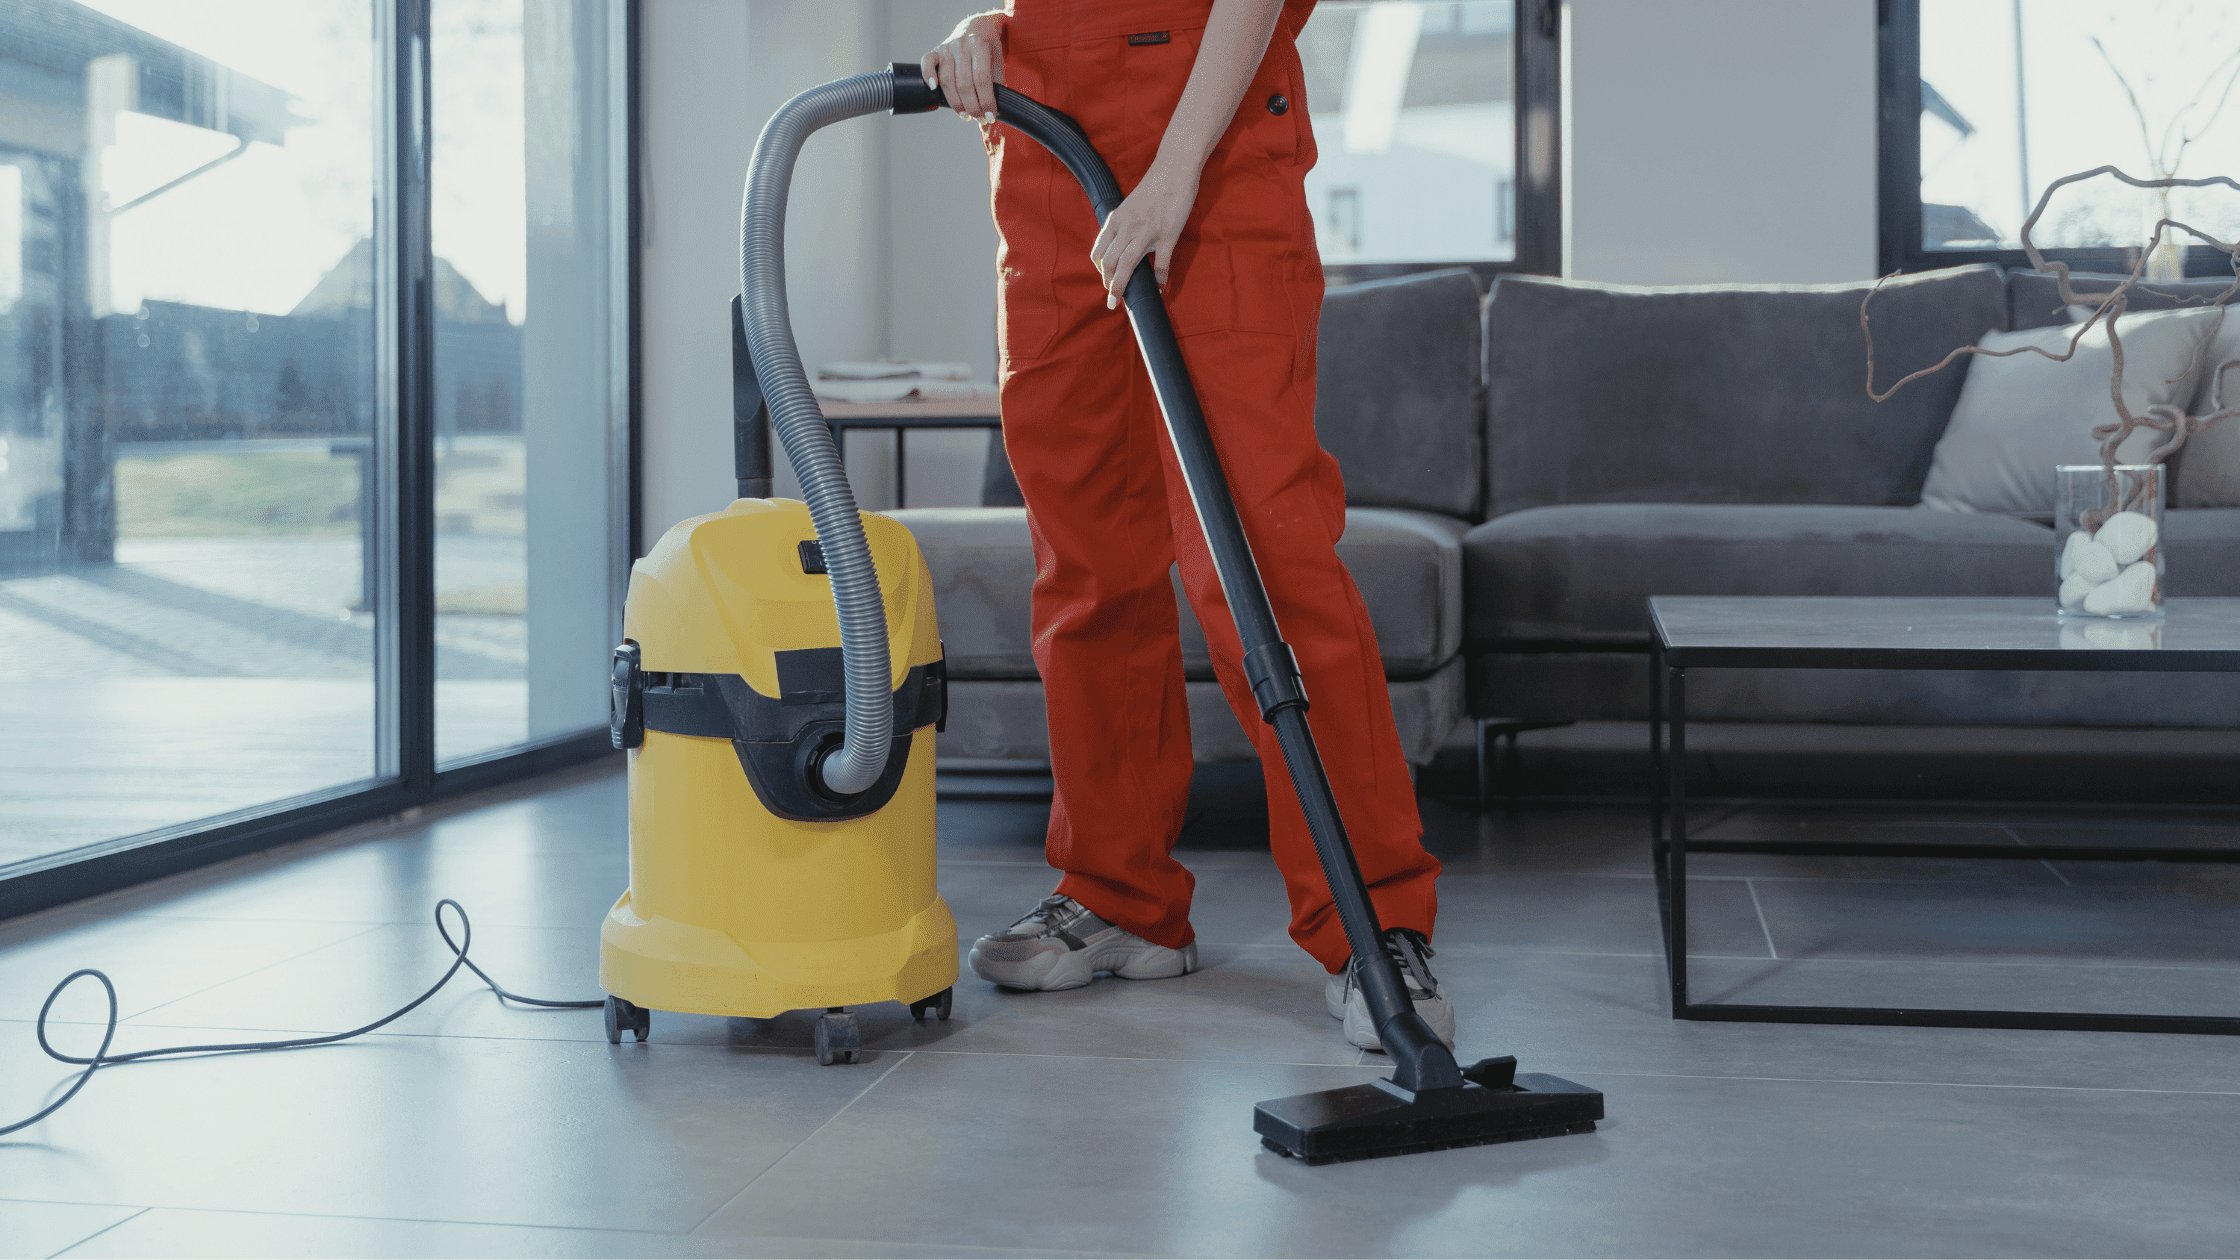 Best Vacuum For Carpet And Hardwood Review: Buying Guide